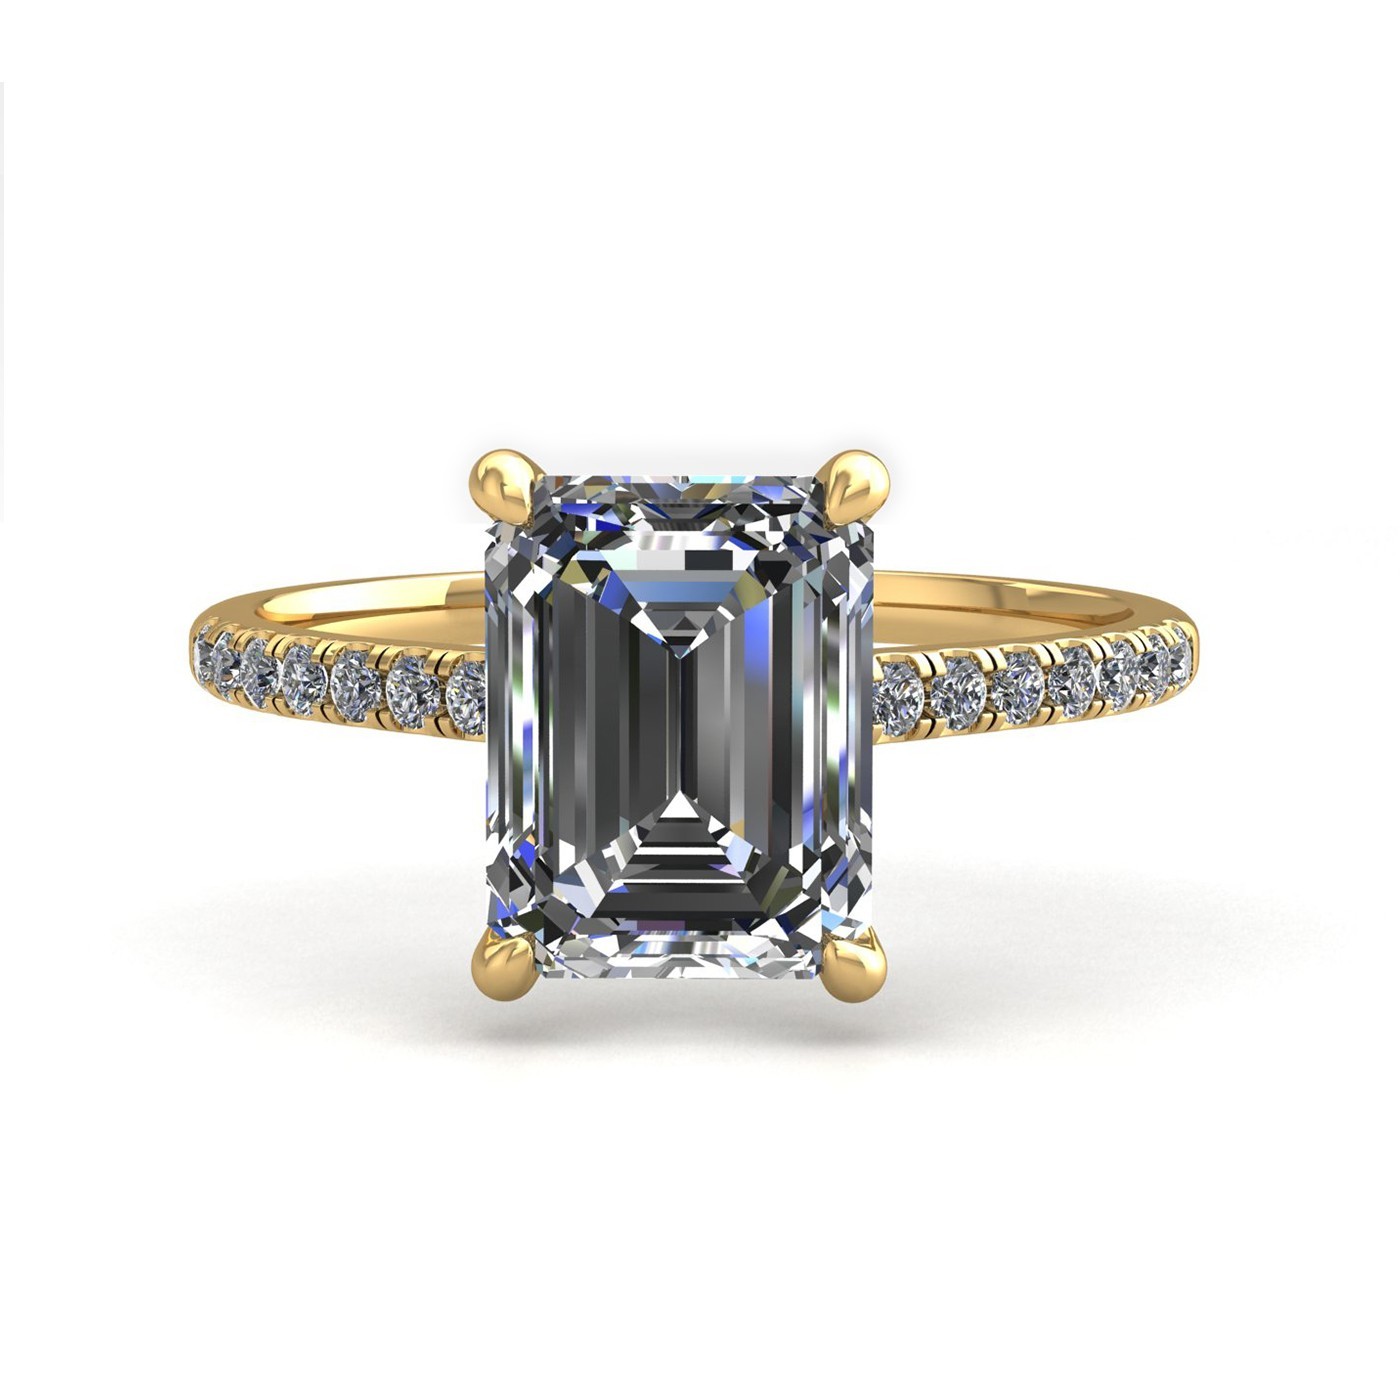 18k yellow gold 2.5ct 4 prongs emerald cut diamond engagement ring with whisper thin pavÉ set band Photos & images